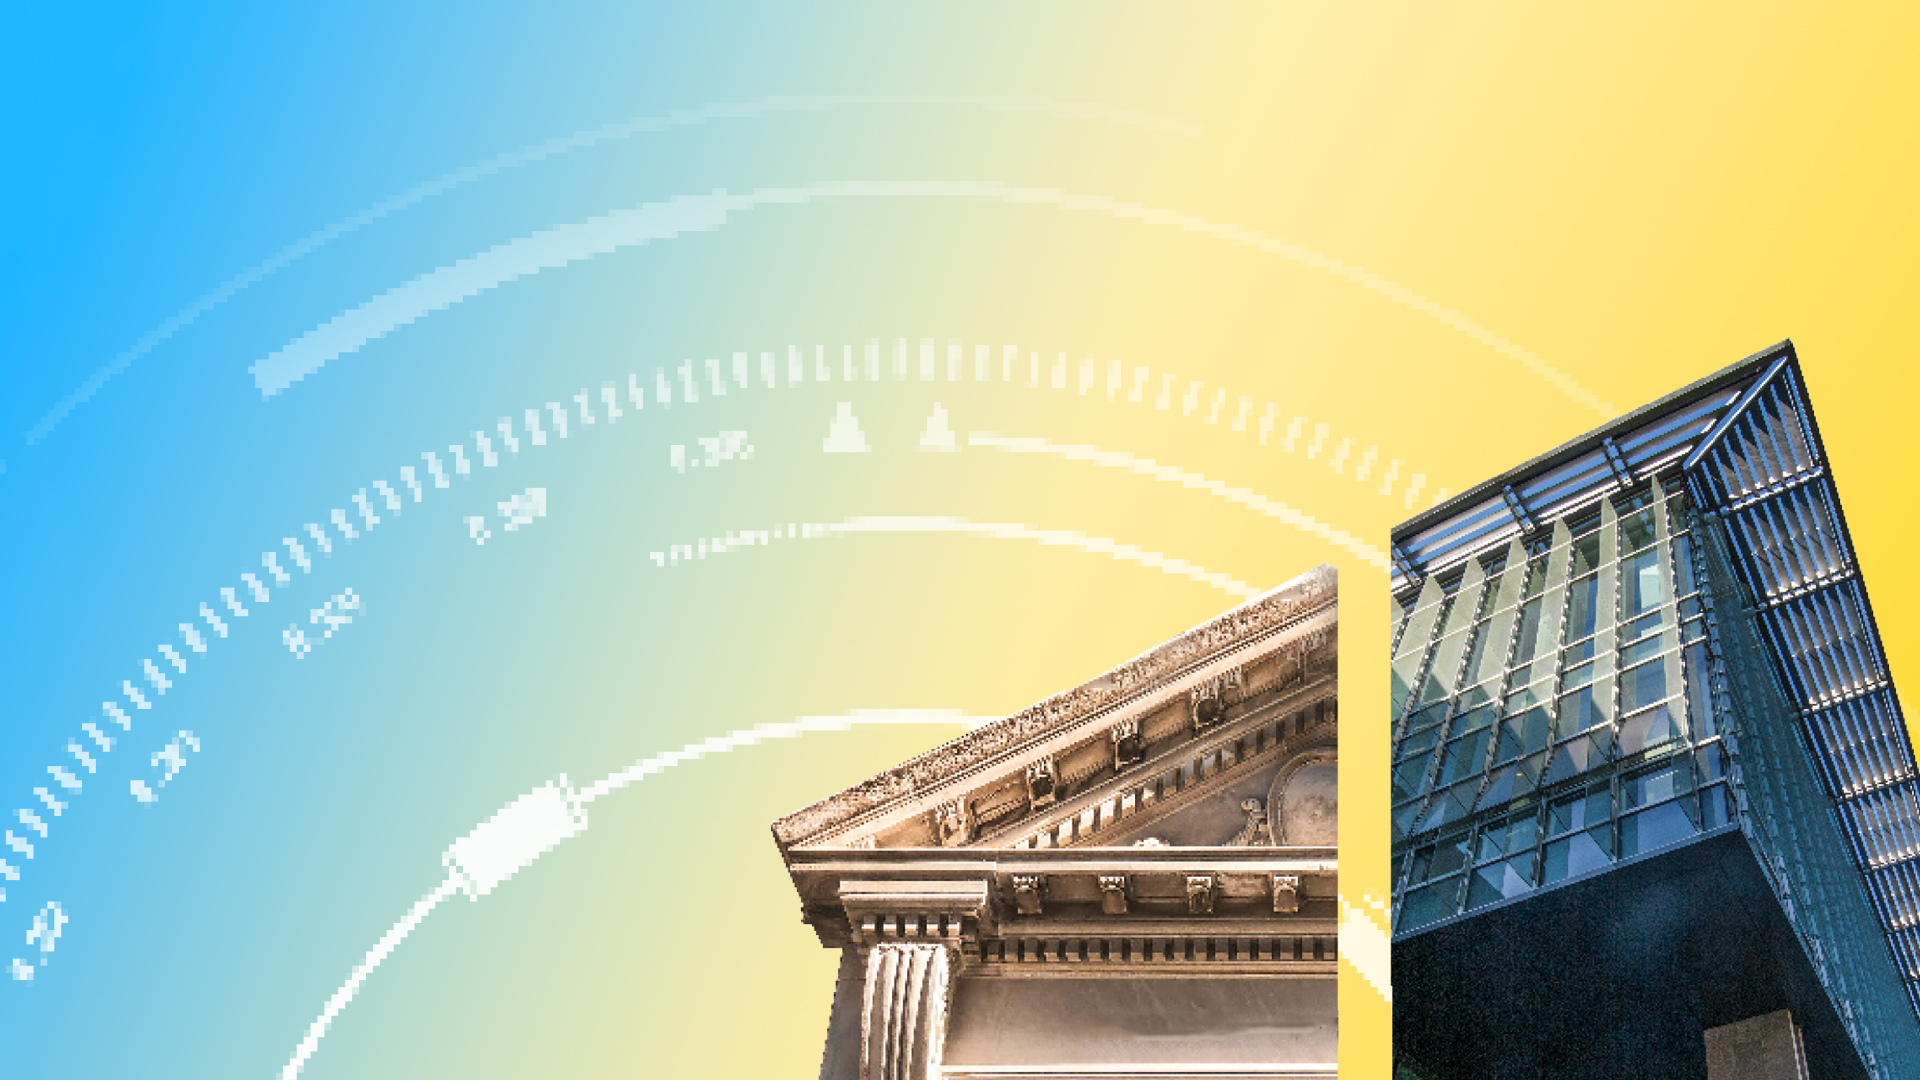 A collage of the Health Sciences and James Branch Cabell libraries with an arch background of blue and yellow.